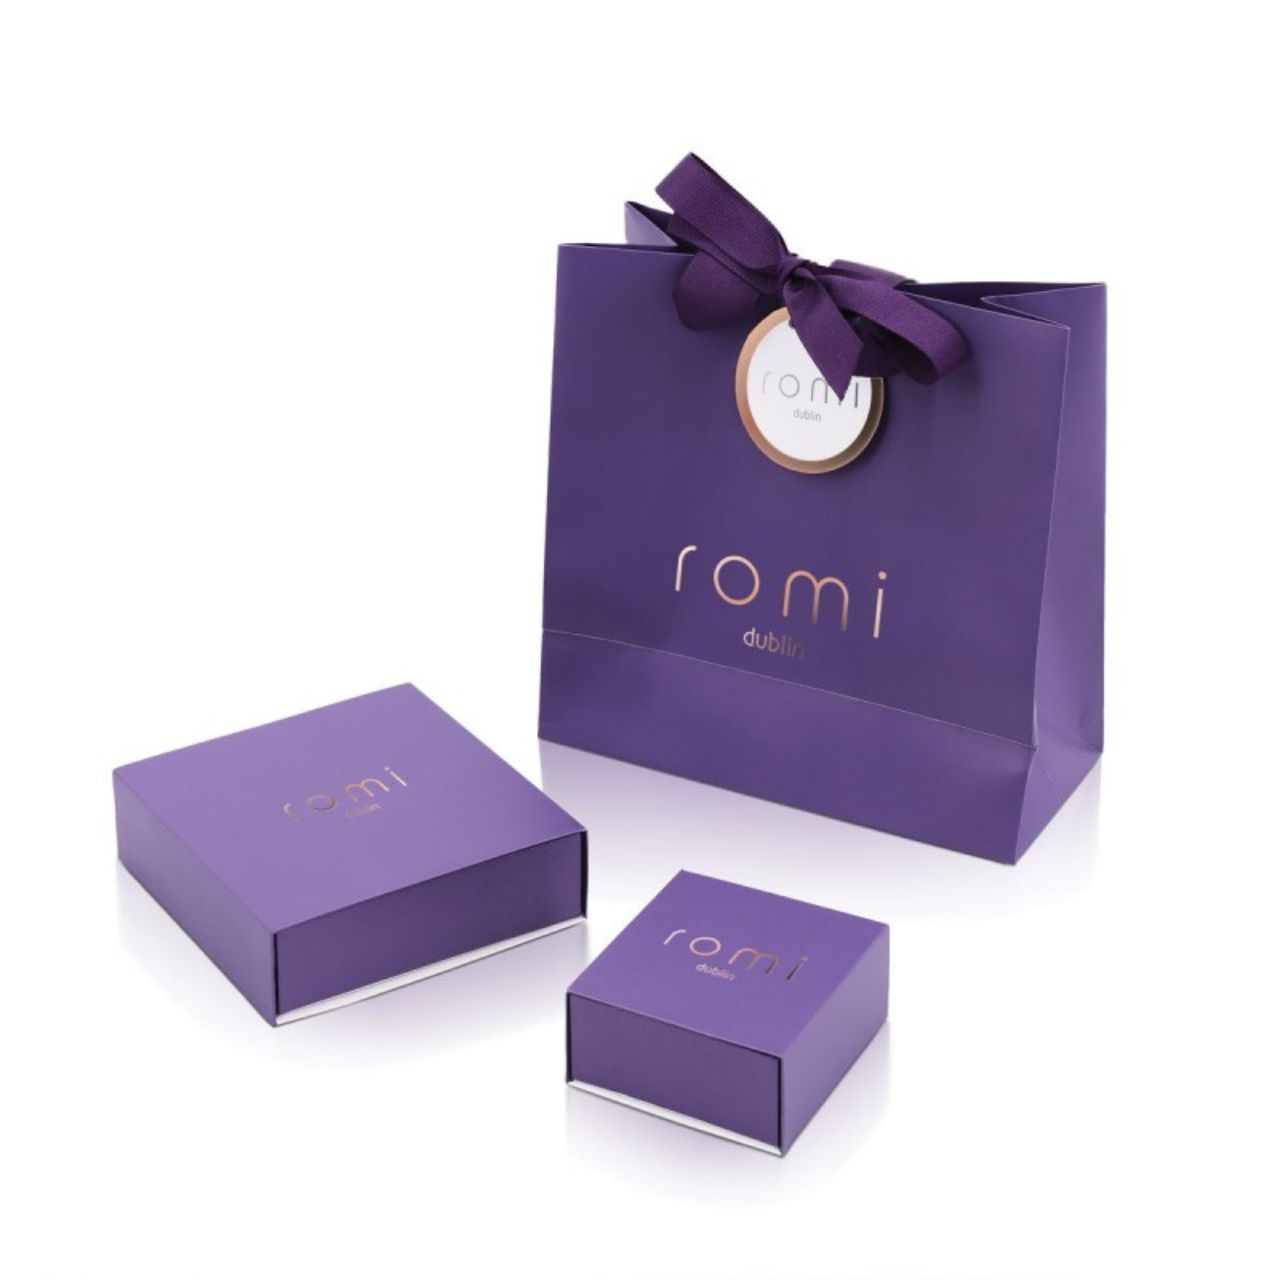 Romi Dublin Rose Gold Pearl Small Earrings  Simple and understated this collection has a contemporary and sleek look that will allow you to accessorise with any outfit.